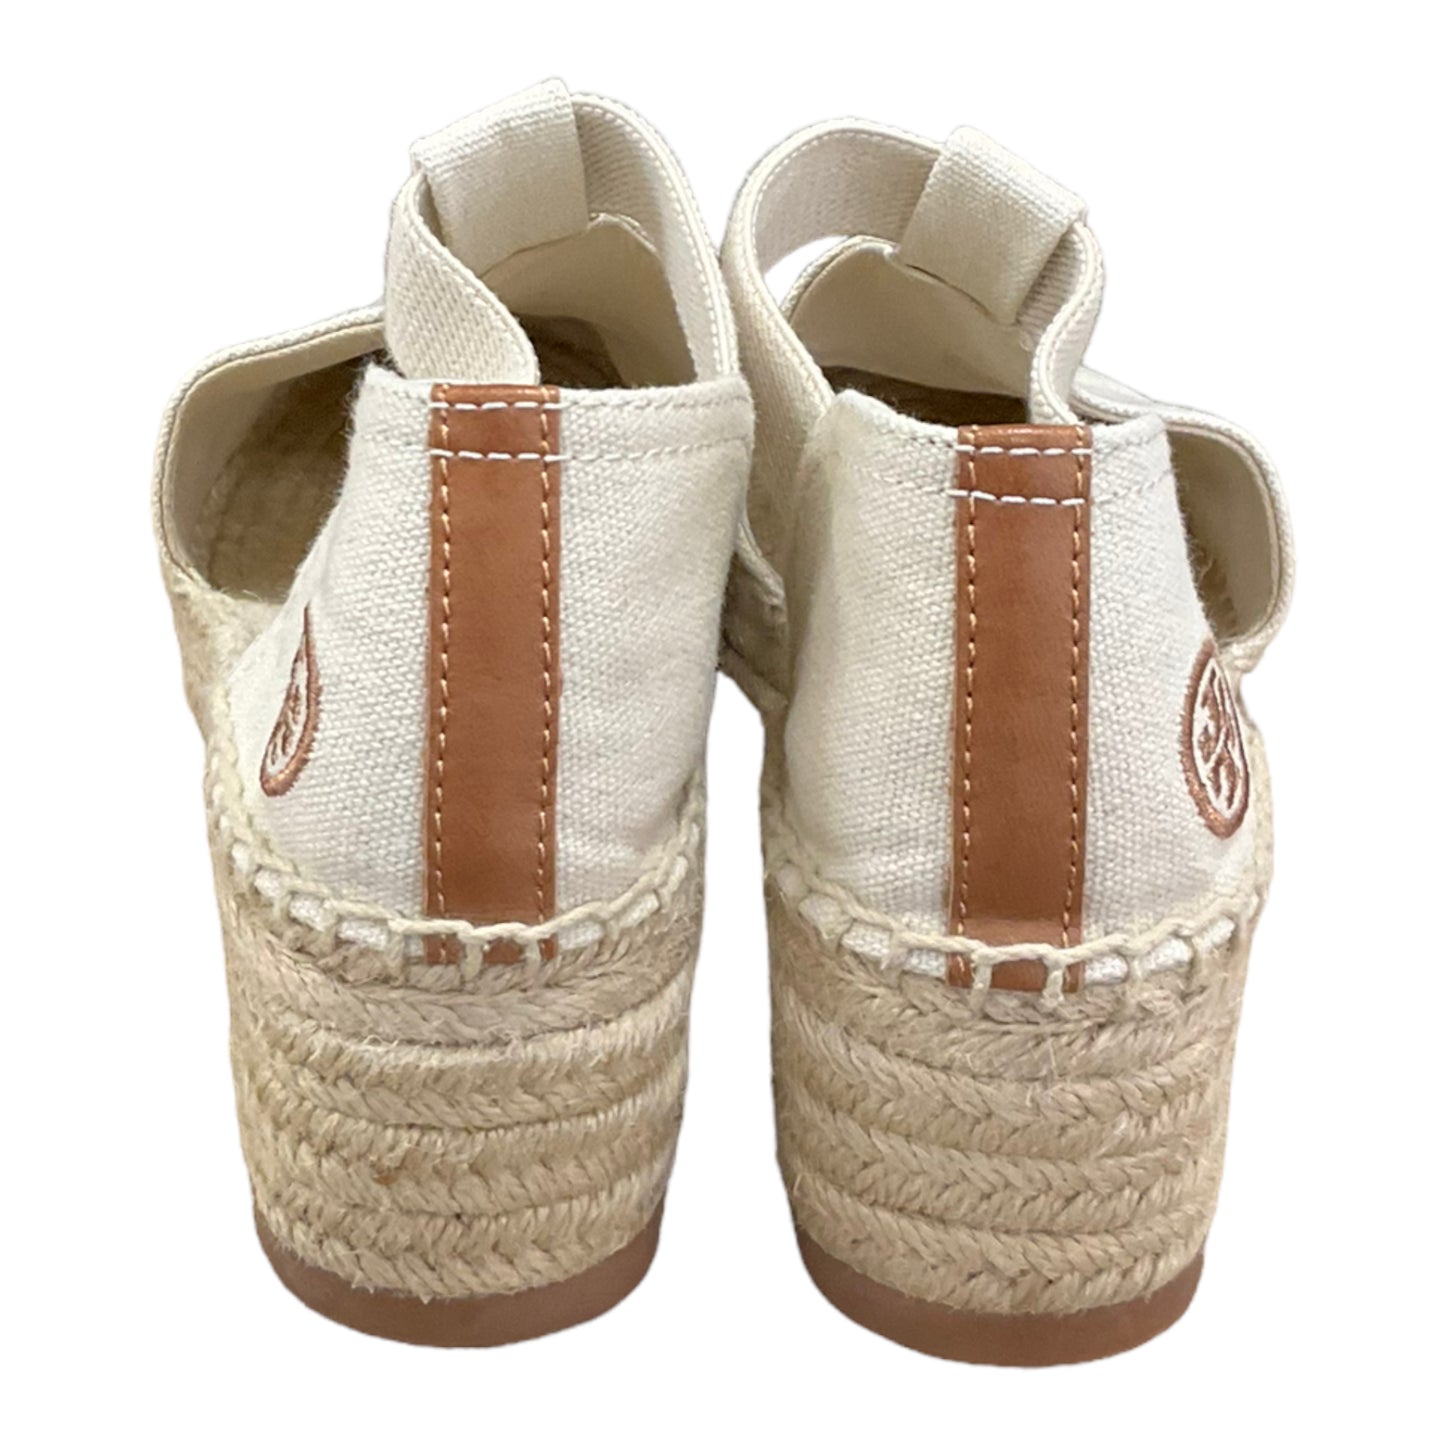 Shoes Heels Espadrille Wedge By Tory Burch  Size: 8.5